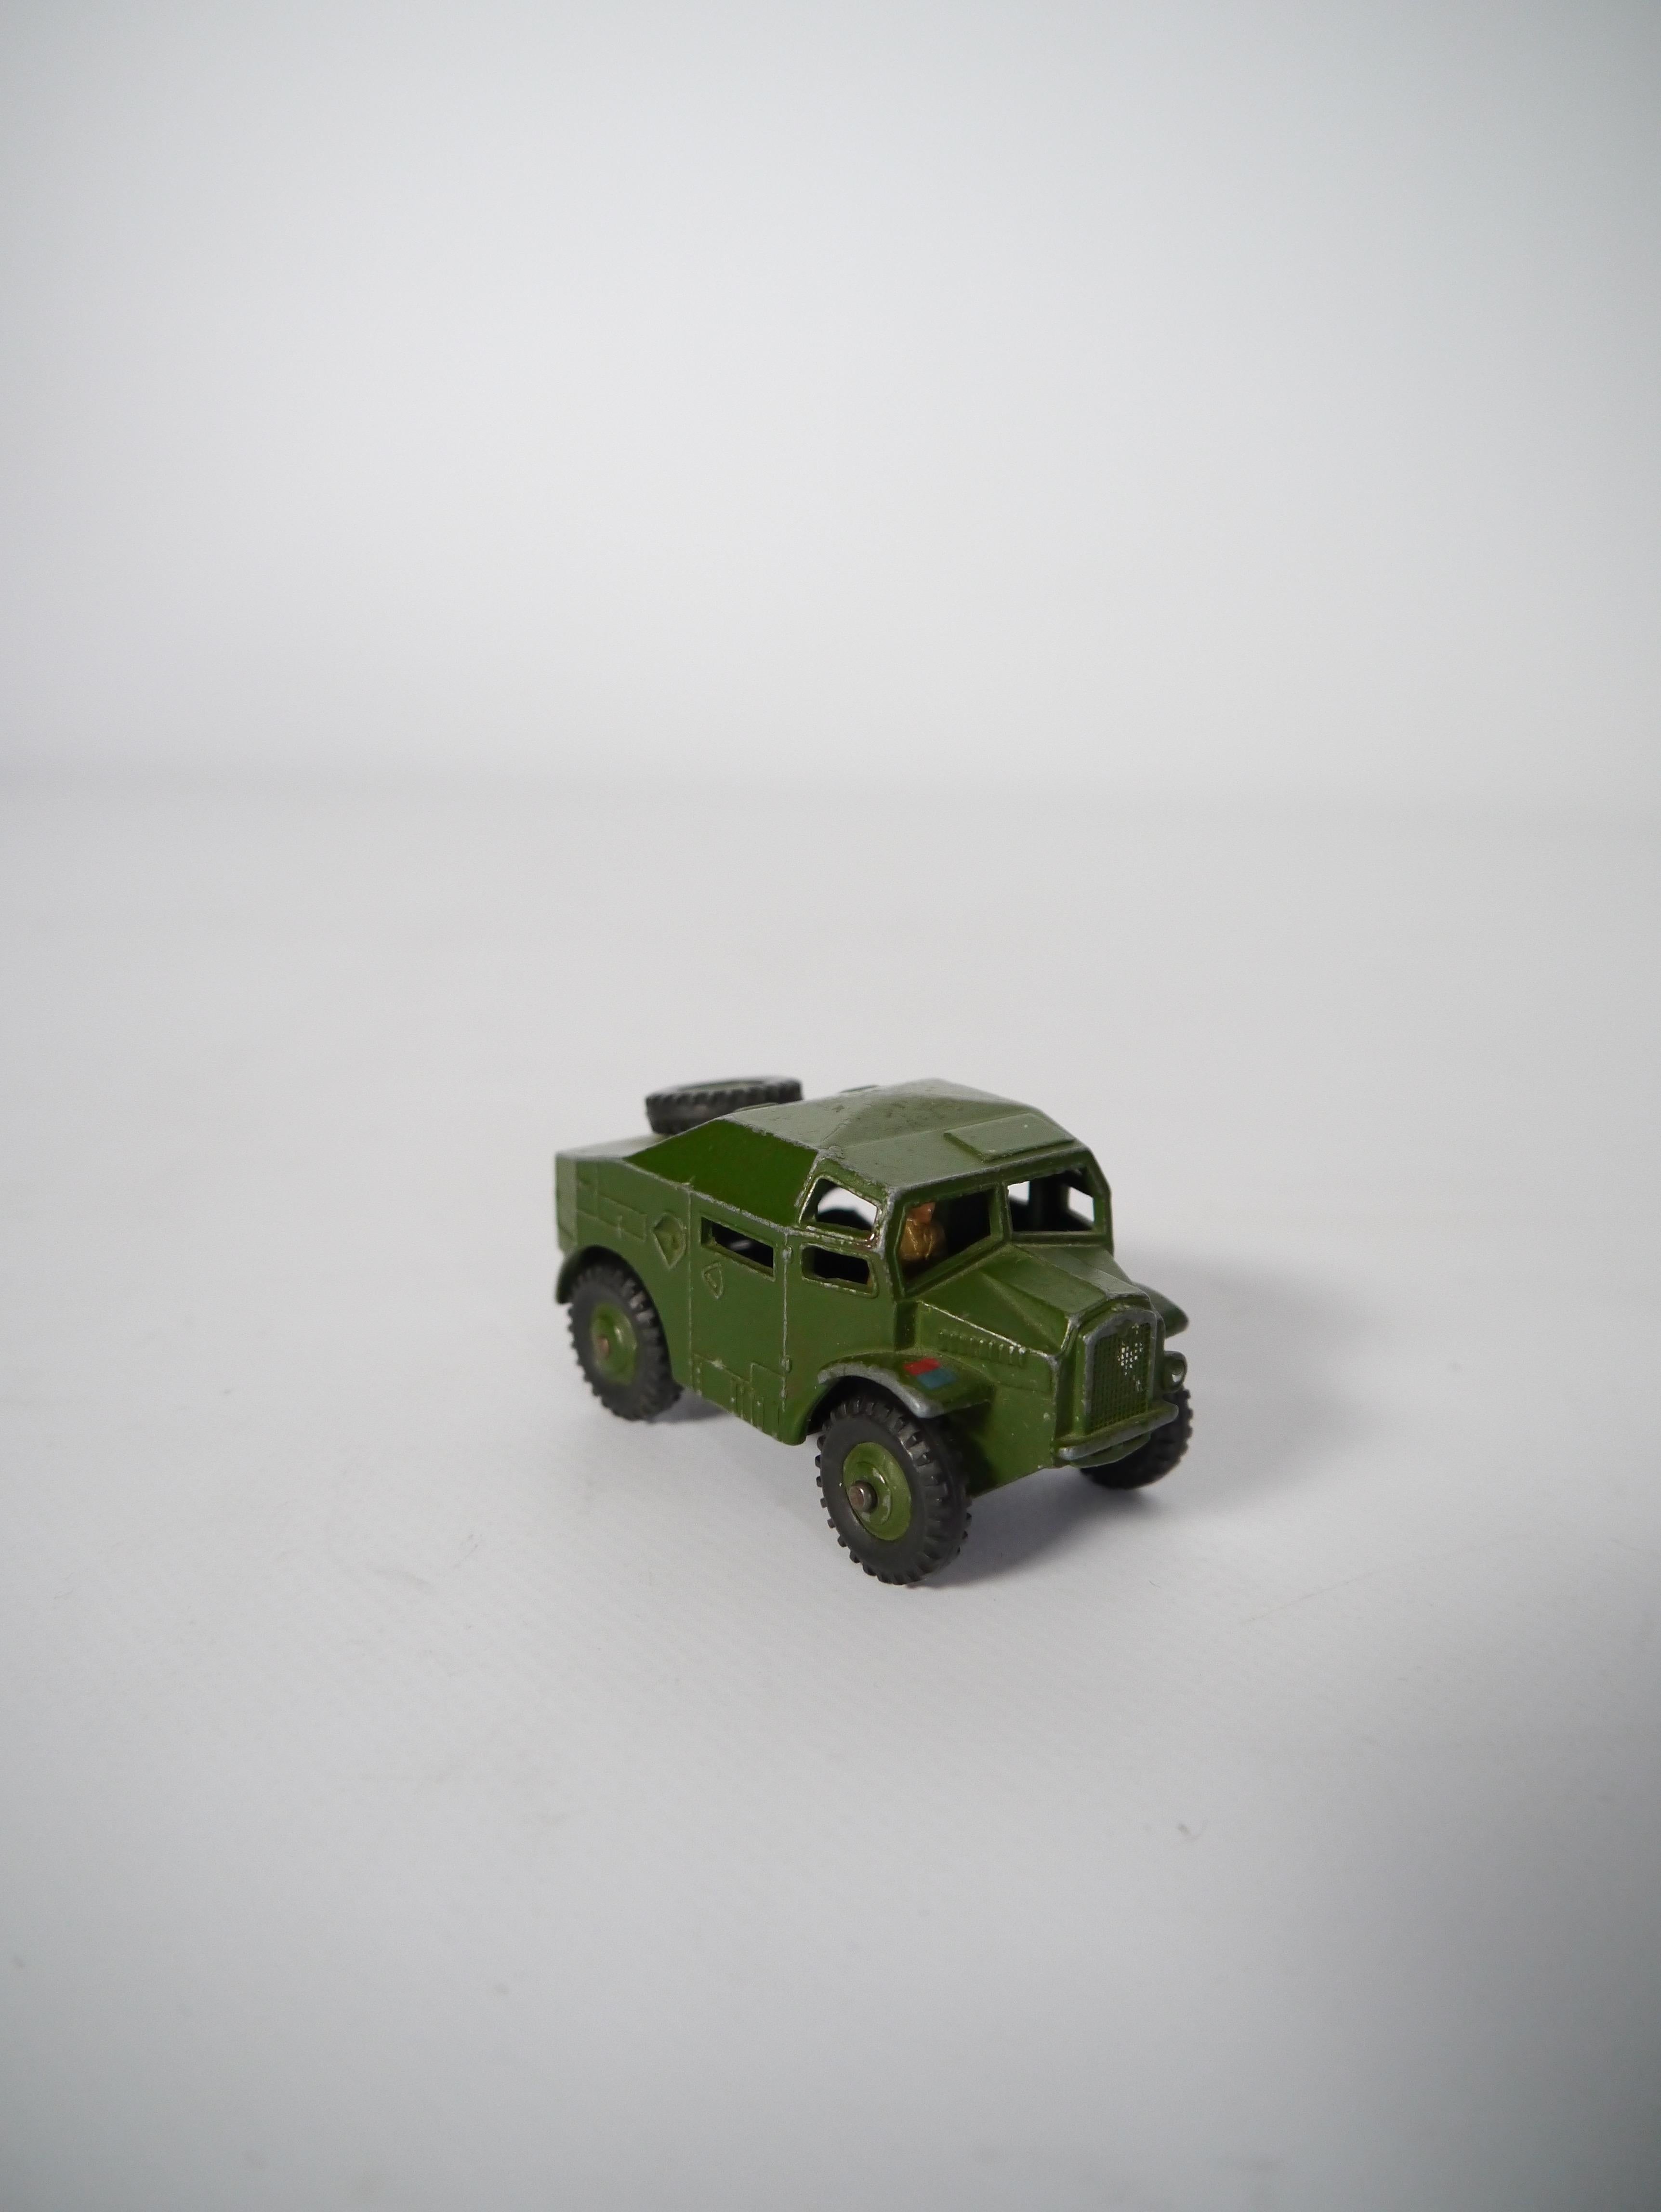 Dinky Toys miniature army vehicle; Field Artillery Tractor. Fabricated by Meccano Ltd in 1967. Very good condition, only shows some minor wear due to playing.